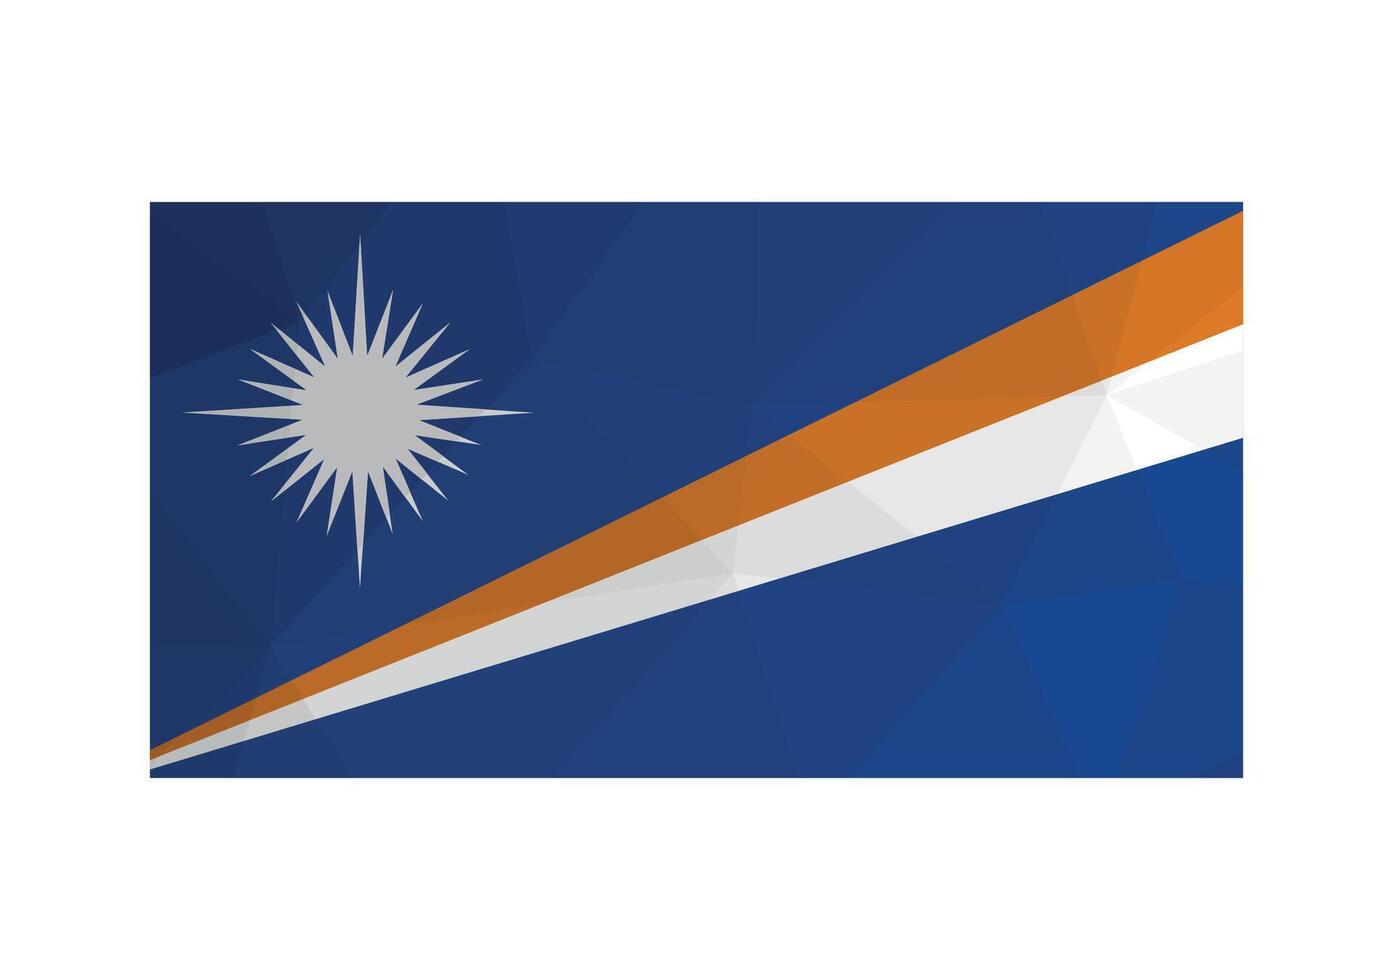 Vector illustration. Official ensign of Marshall Islands. National flag with white star on blue background. Creative design in low poly style with triangular shapes.